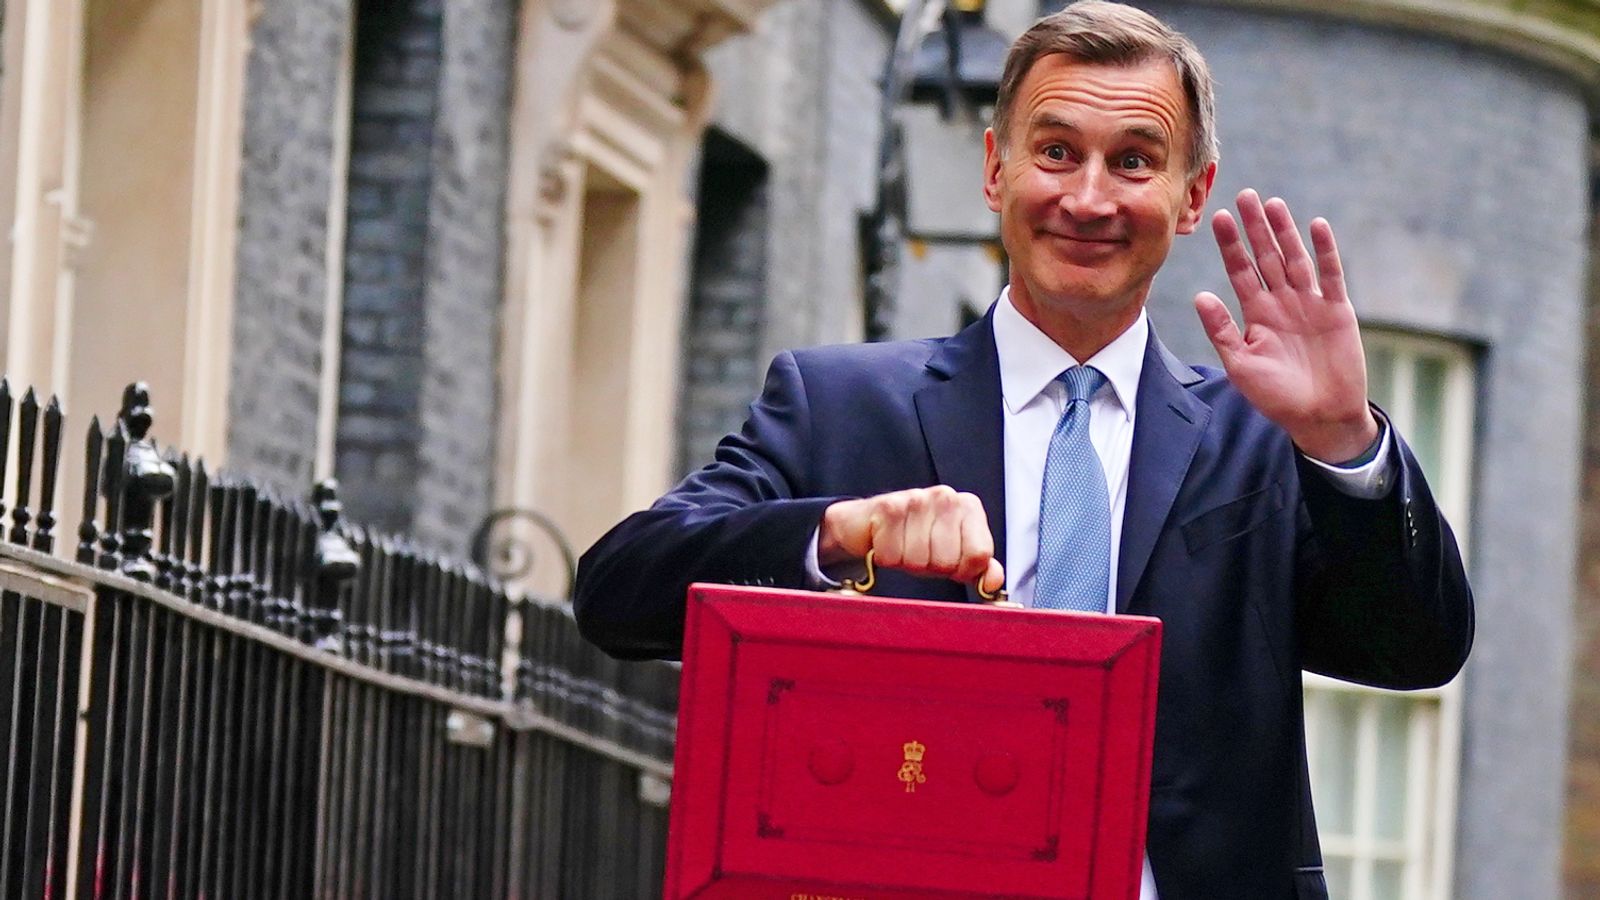 Jeremy Hunt hints at further tax cuts in upcoming budget as he compares himself to Nigel Lawson